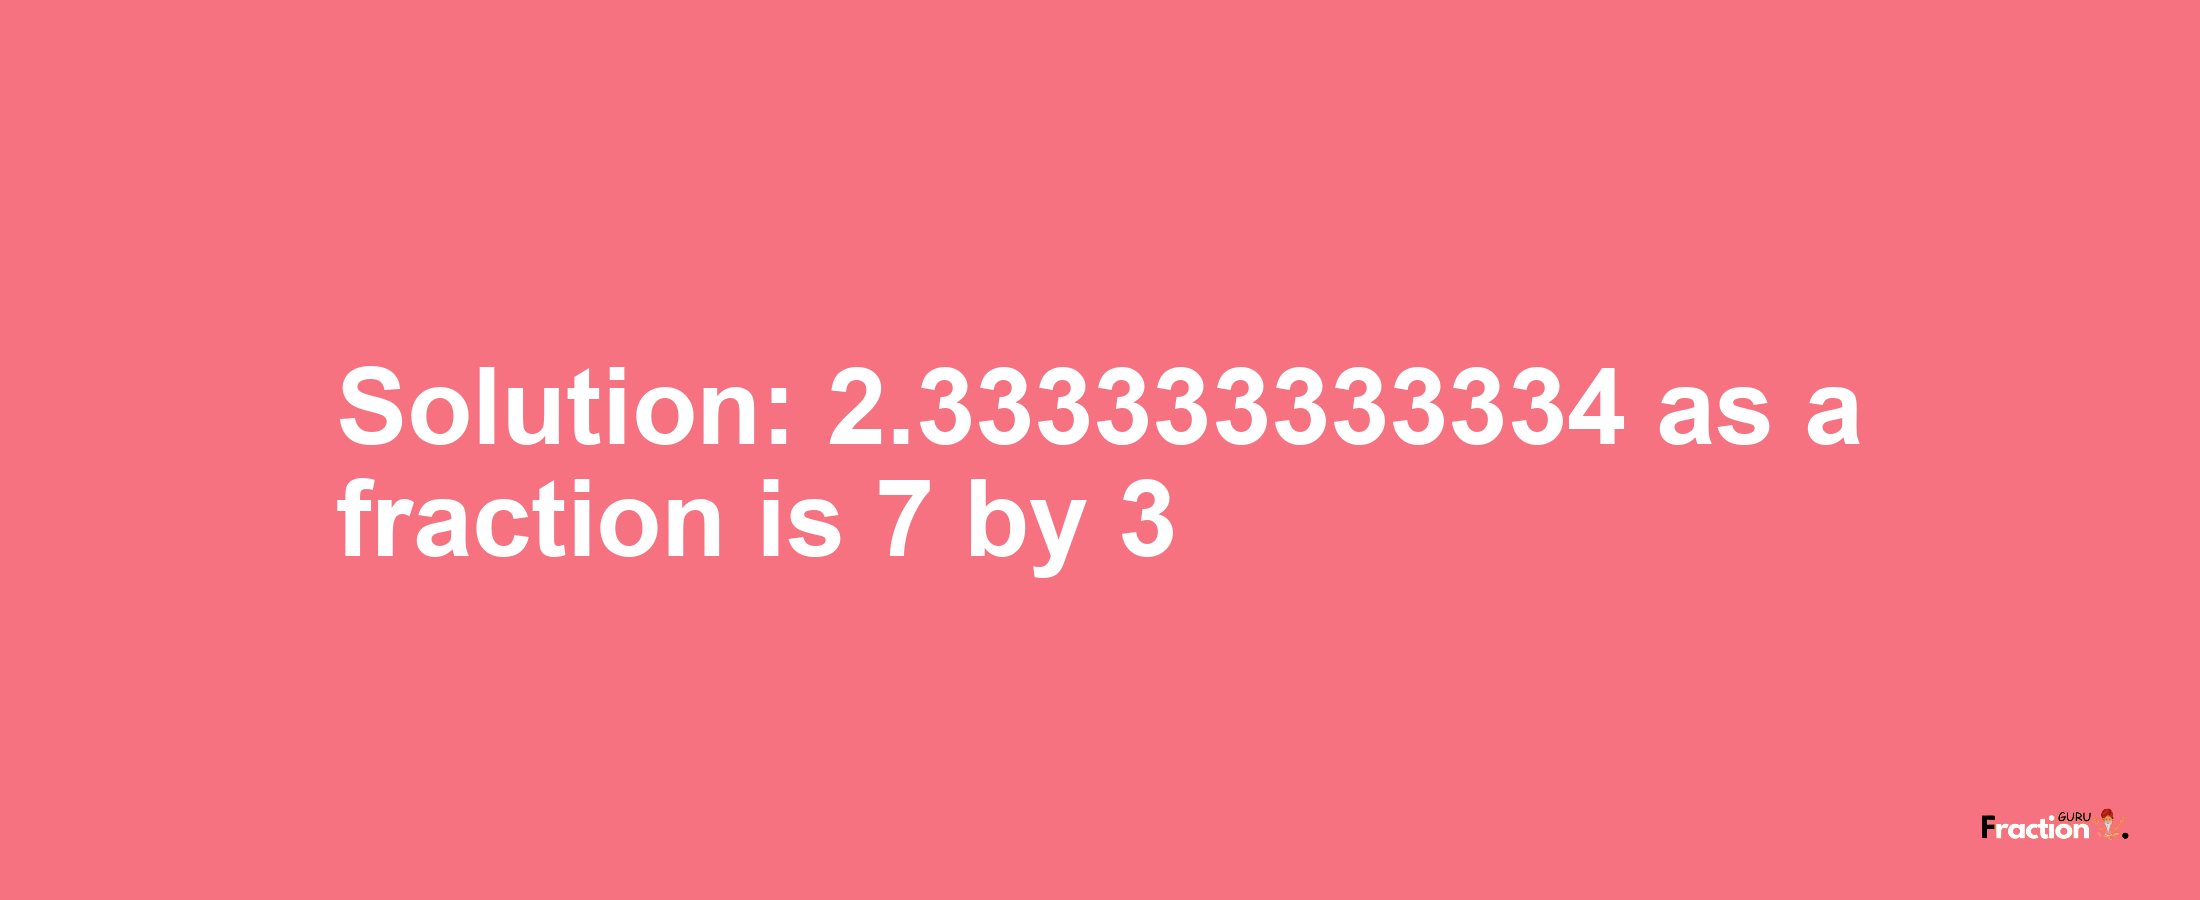 Solution:2.333333333334 as a fraction is 7/3